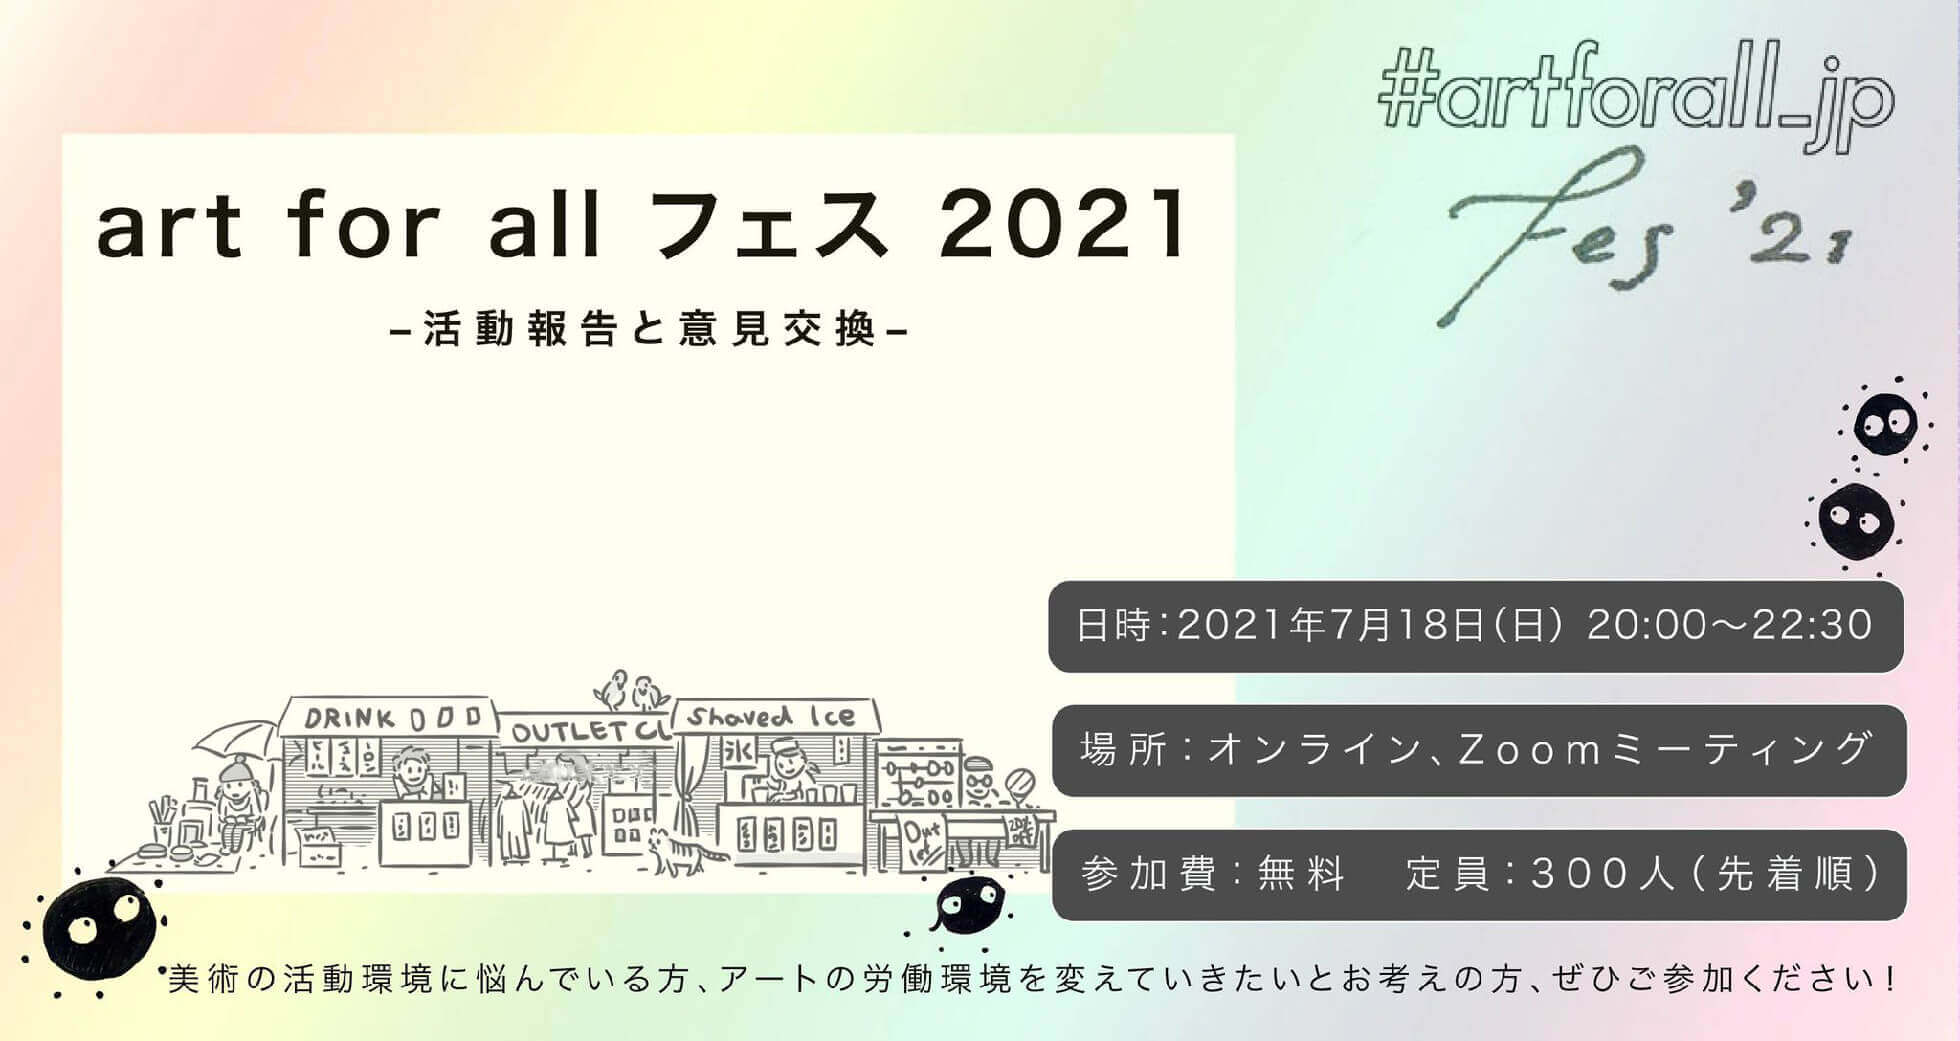 art for all フェス2021〜活動報告と意見交換〜